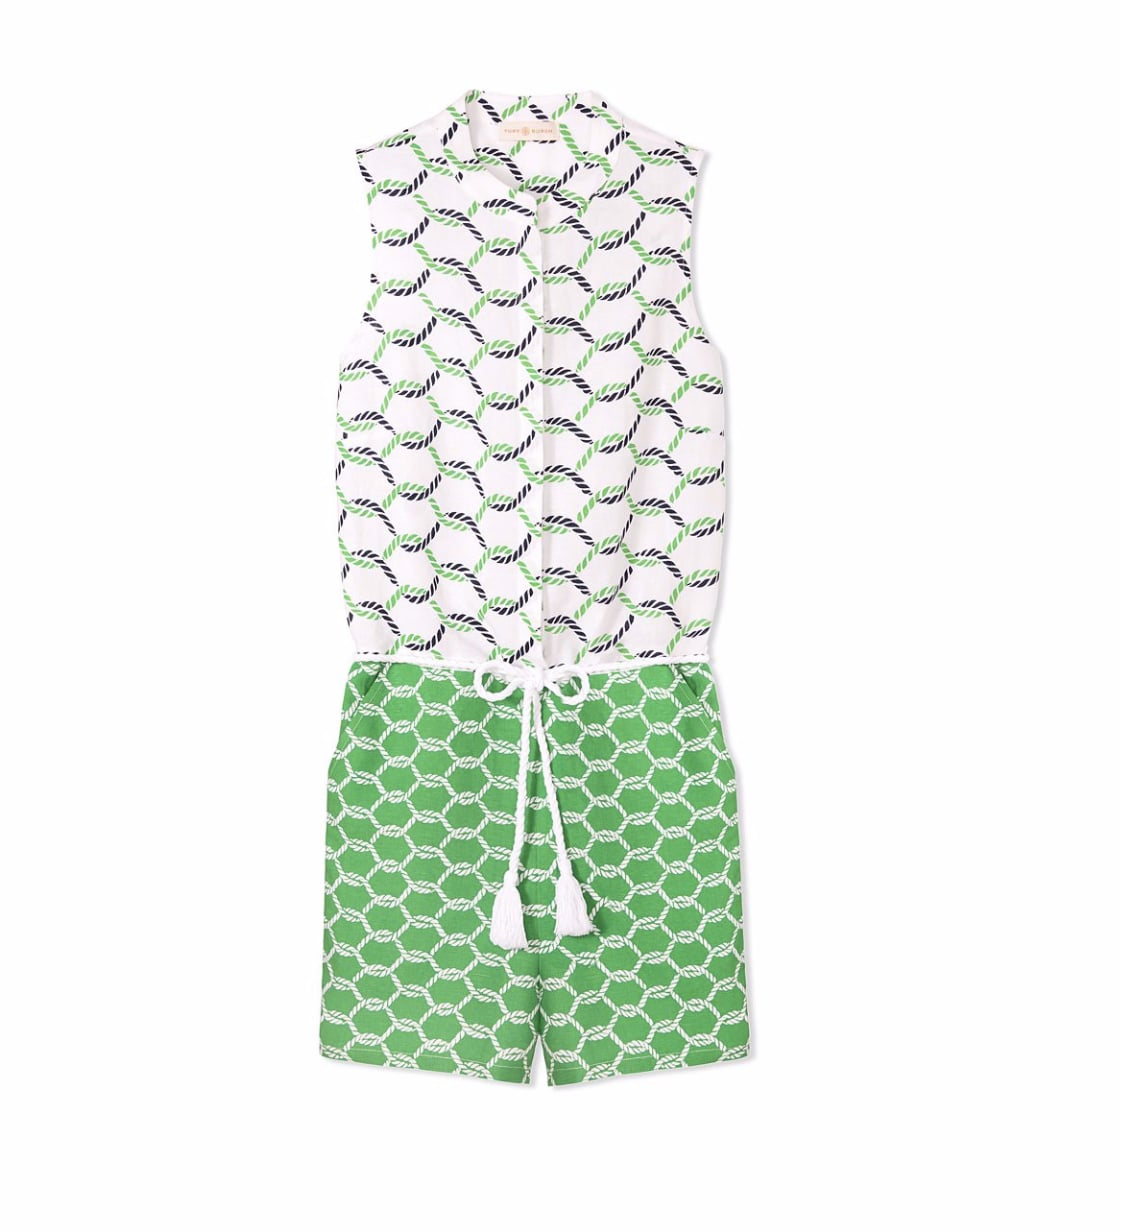 Tory Burch Isle Rope Romper | The 25 Cutest Rompers You'll Want to Live In  All Summer Long | POPSUGAR Fashion Photo 6